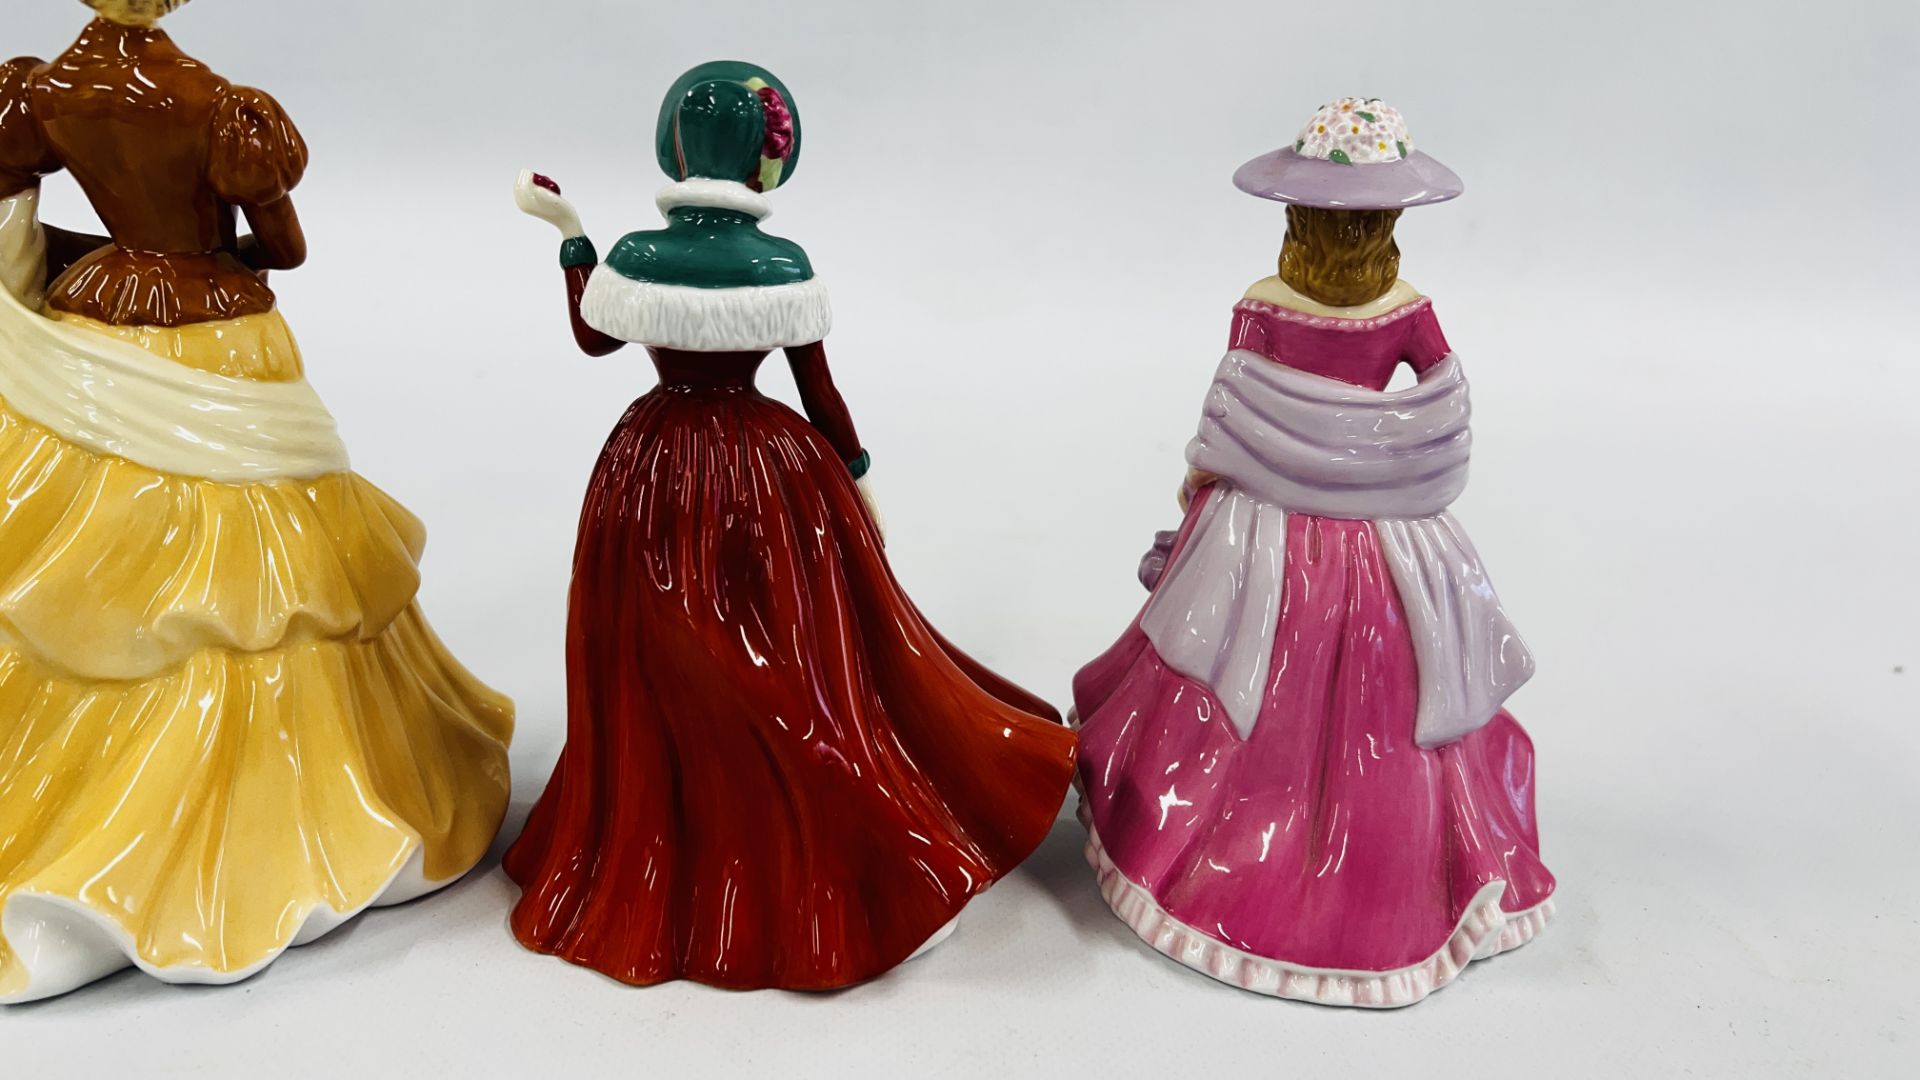 3 ROYAL DOULTON CABINET COLLECTORS FIGURES TO INCLUDE "SUMMER BREEZE" HN 4587, - Image 7 of 9